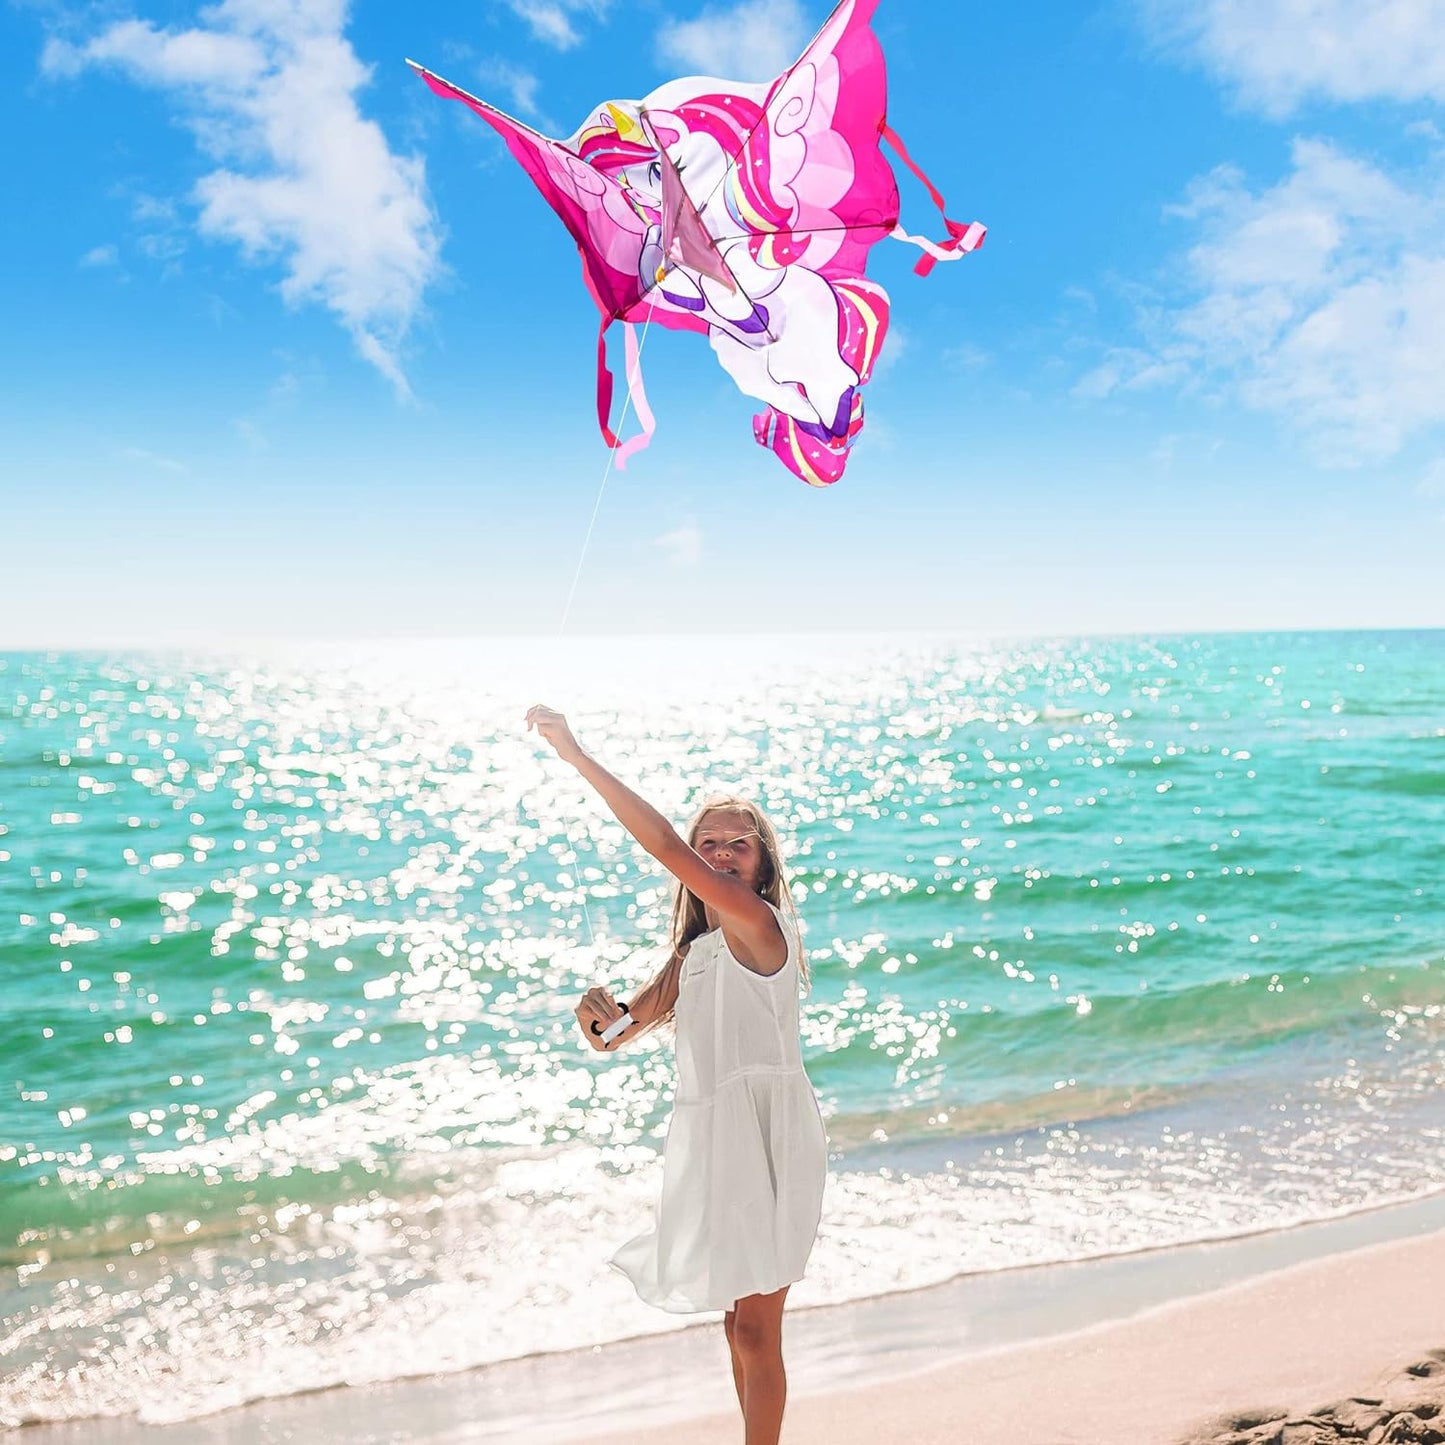 43.3'' Giant Unicorn Kite Easy to Fly Huge Kites for Kids and Adults with 262.5 Ft Kite String, Large Beach Kite for Outdoor Games and Activities